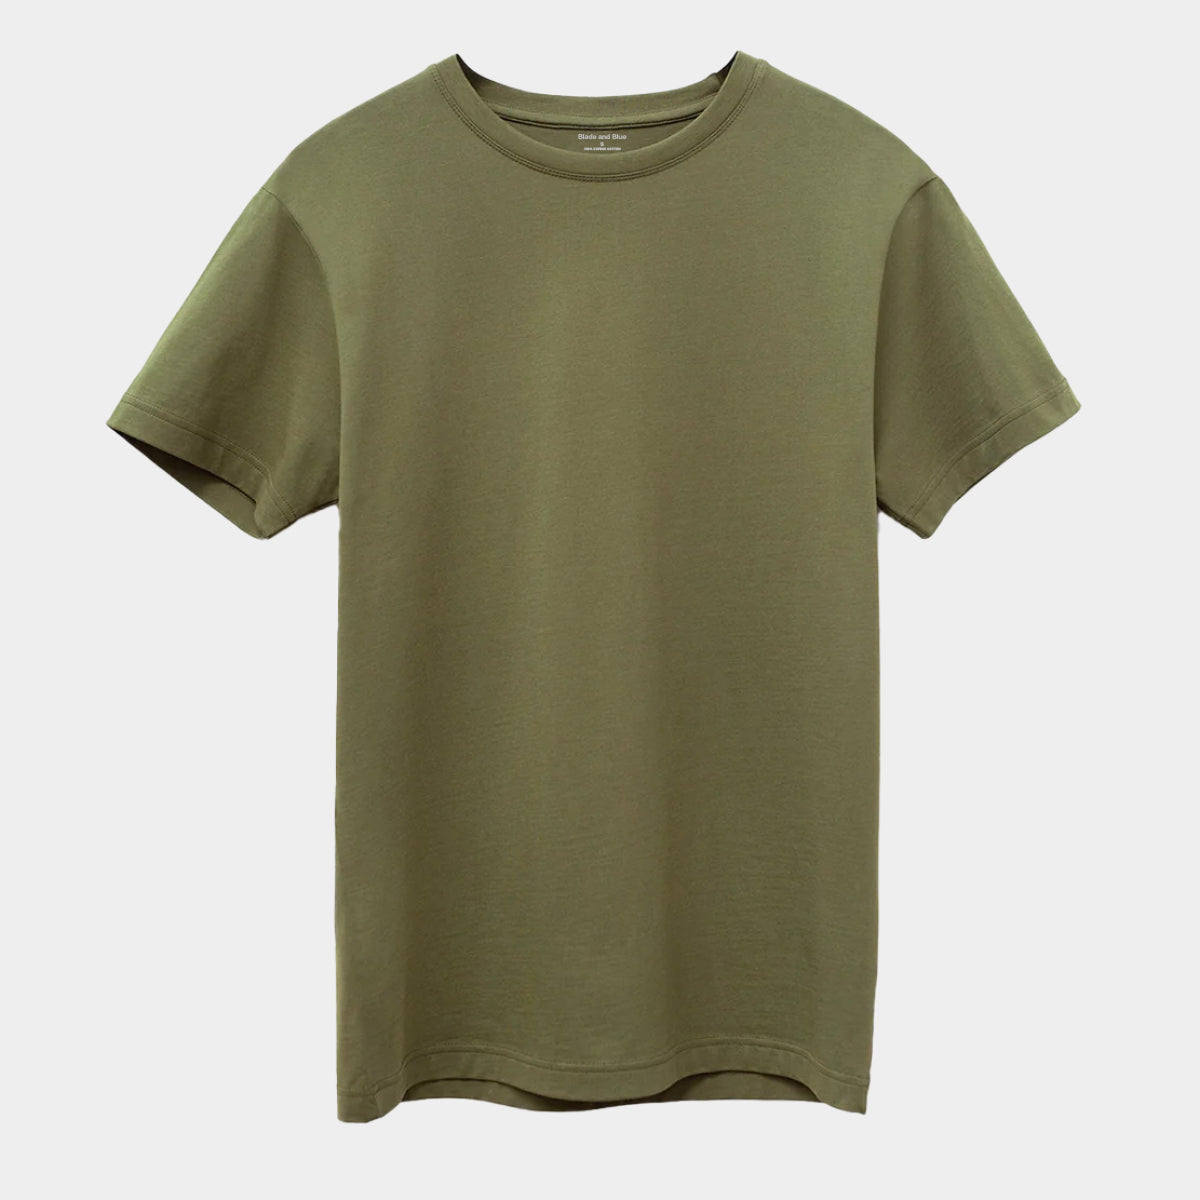 American Grown Supima 100% Cotton Tee in Green Olive